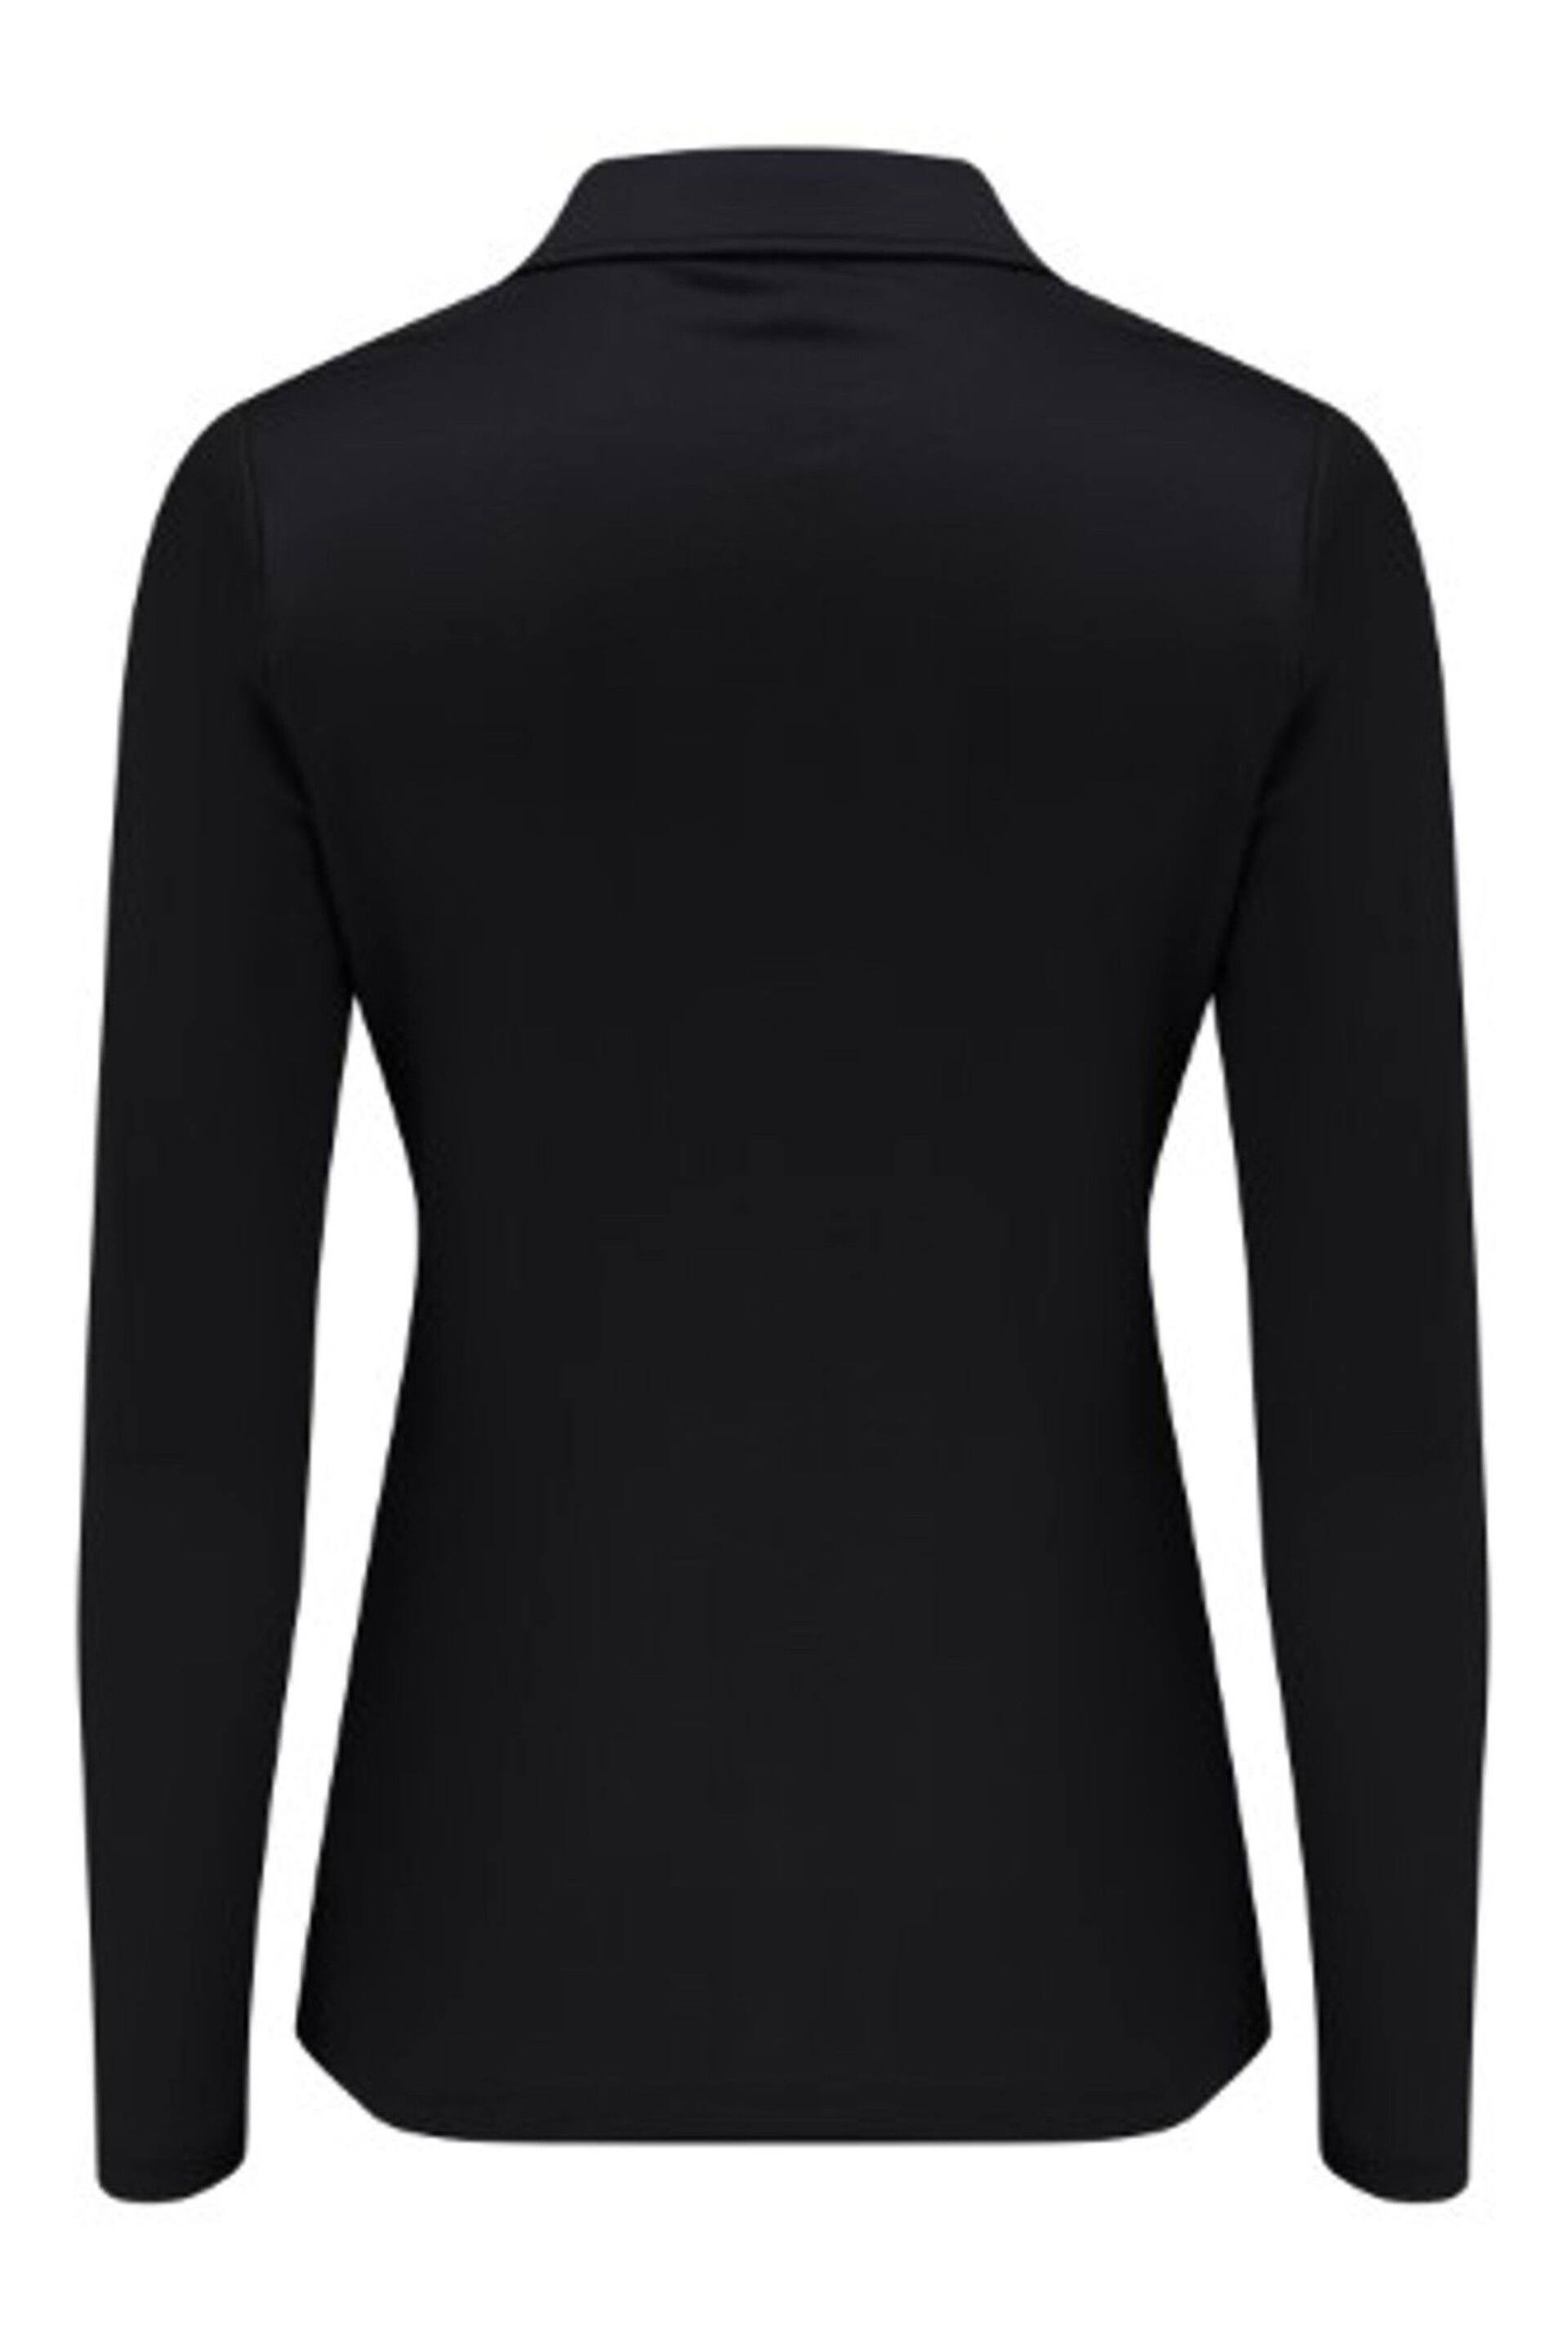 Pour Moi Black Brooke Shine Ruched Front Stretch Shirt - Image 5 of 5